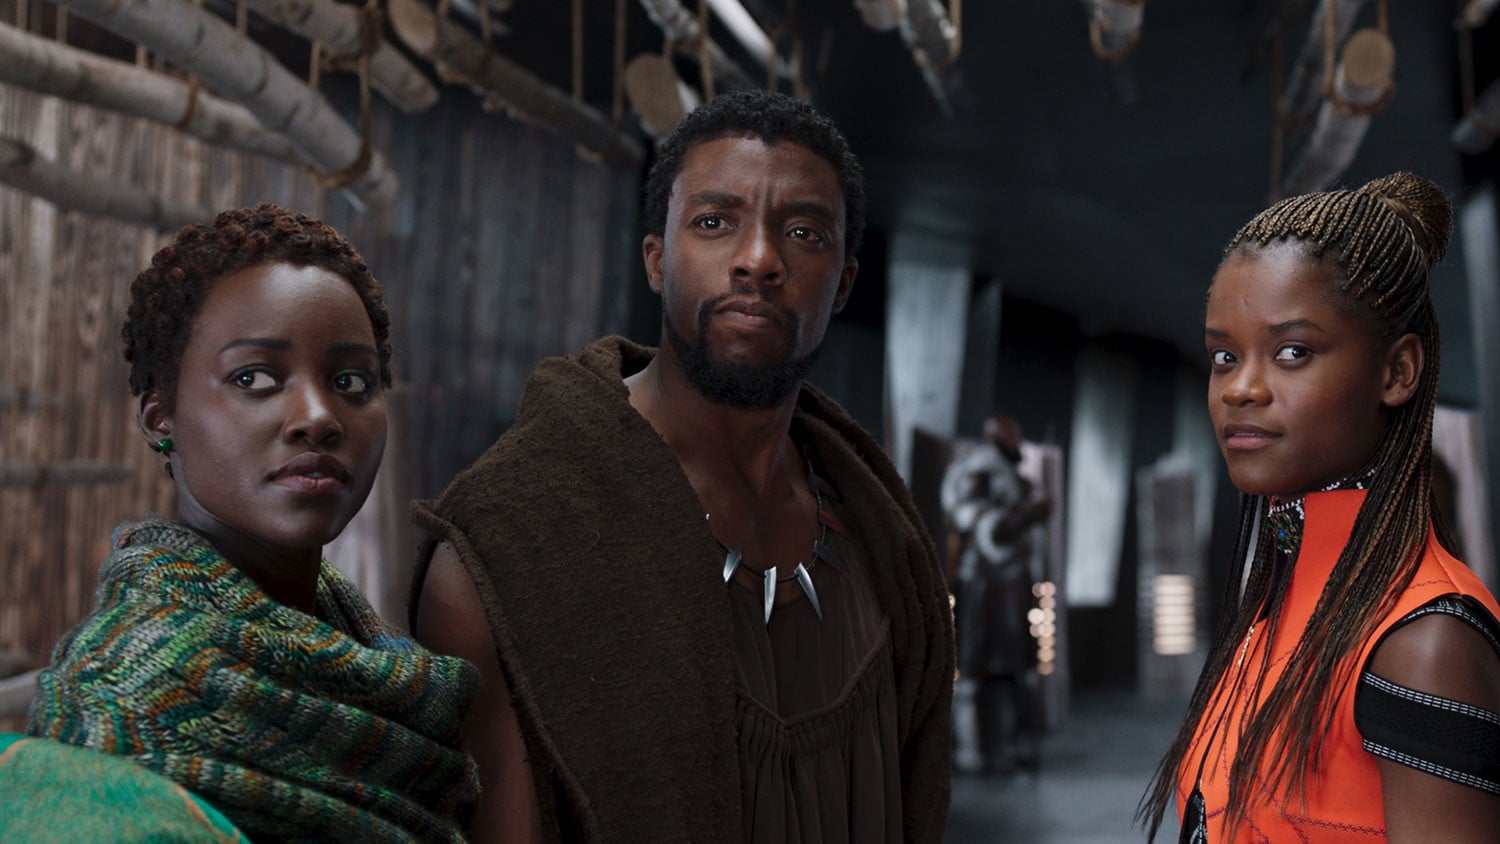 'Black Panther' has proved a game-changer in 2018